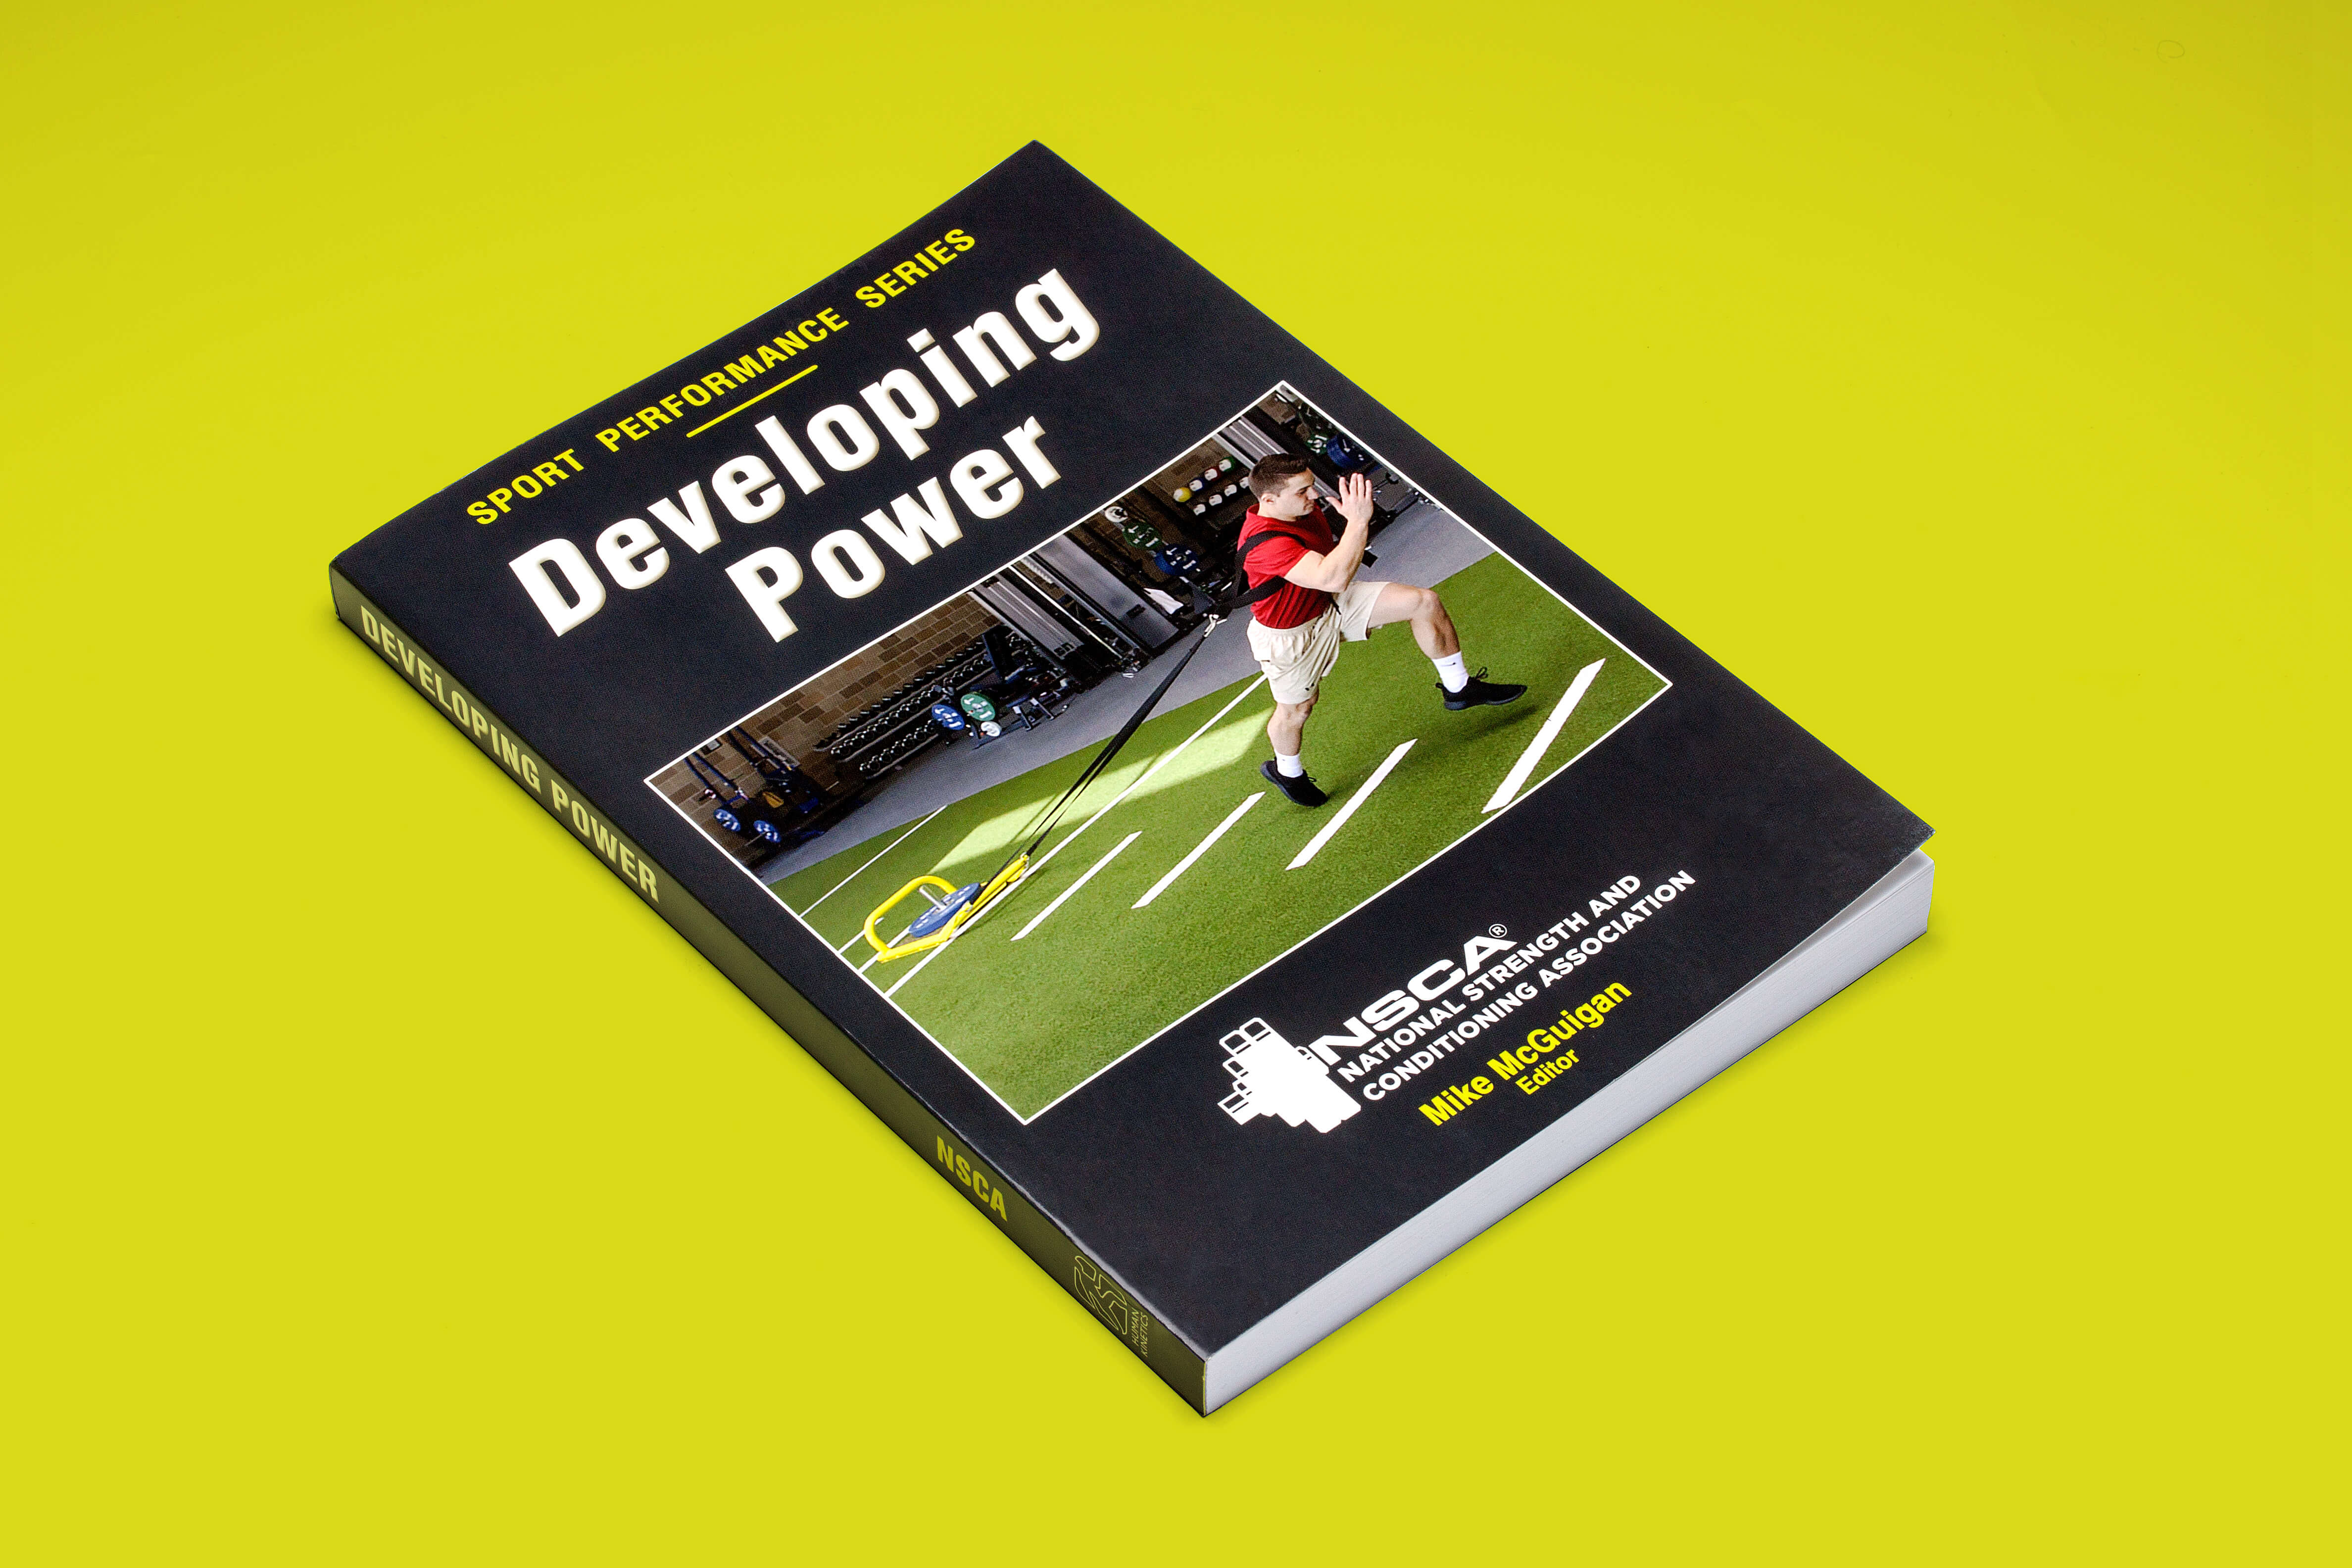 Developing Power, the essential guide to power training methods